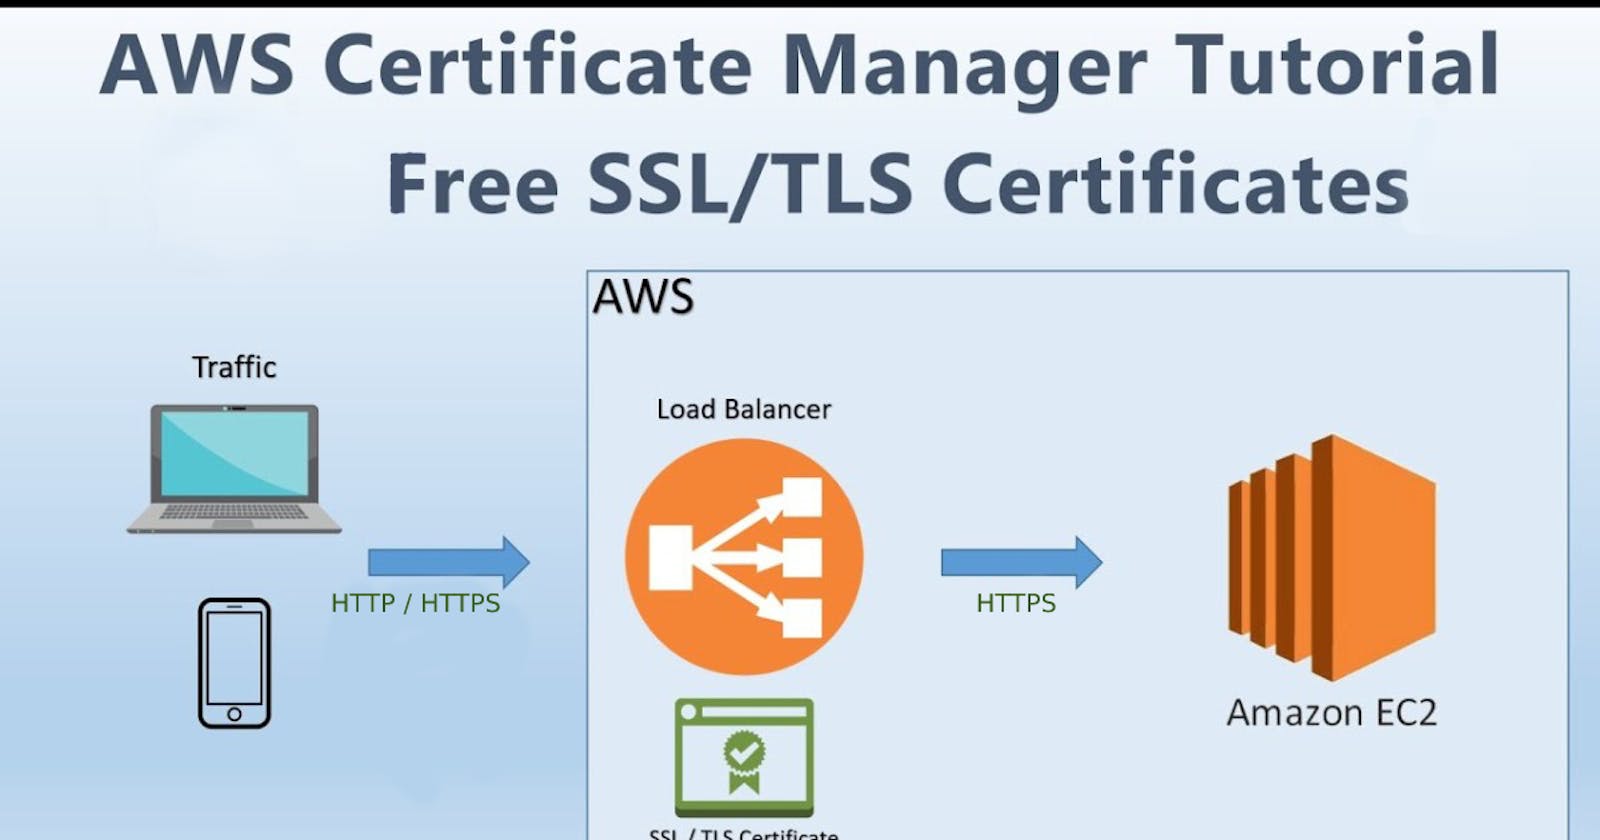 Demonstration of AWS Certificate Manager with Elastic Load Balancer and Route 53.